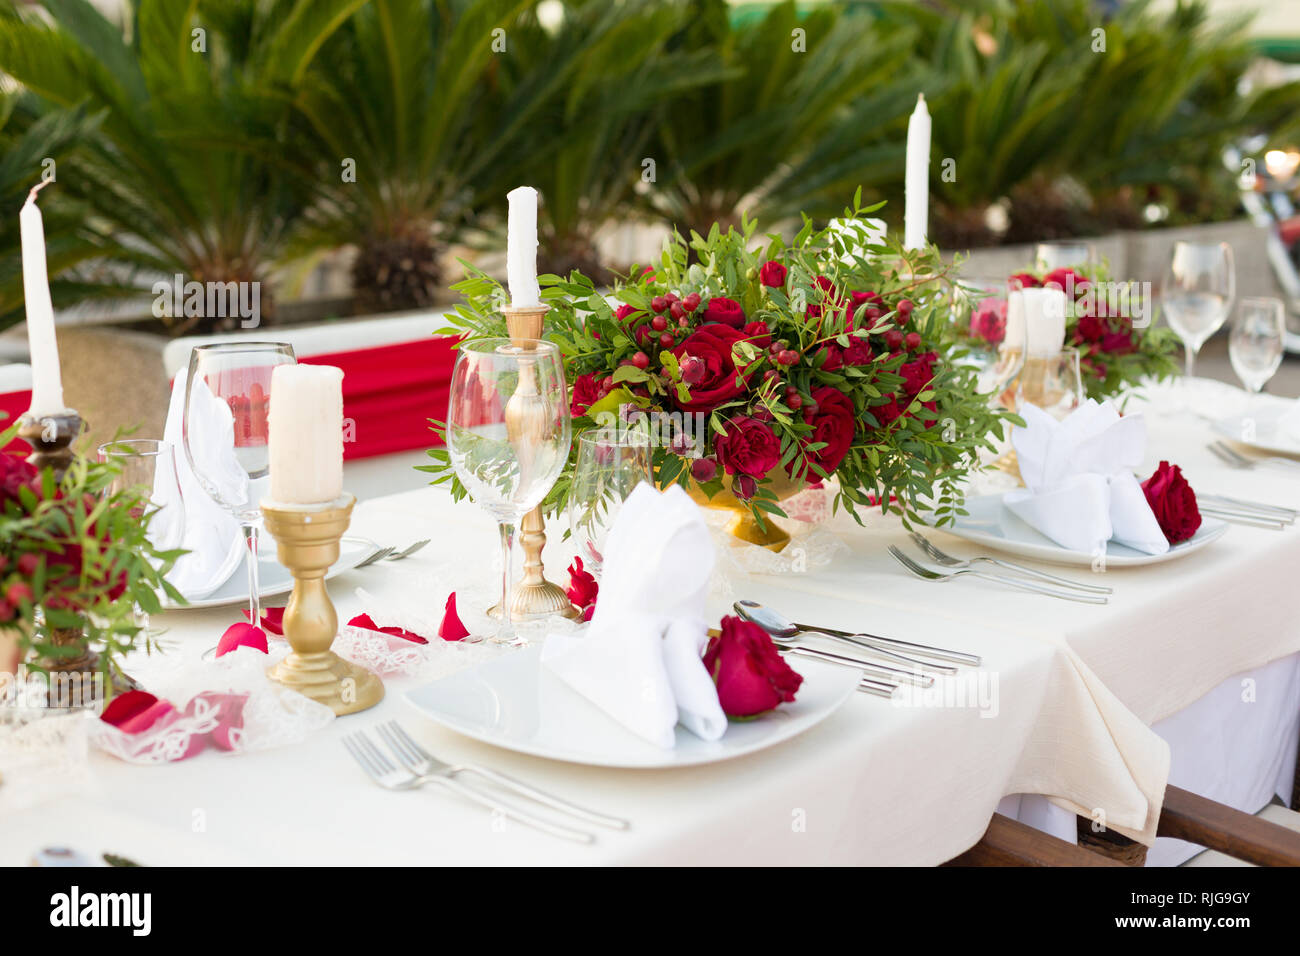 table for a wedding dinner decorated with red flowers and greenery Stock Photo